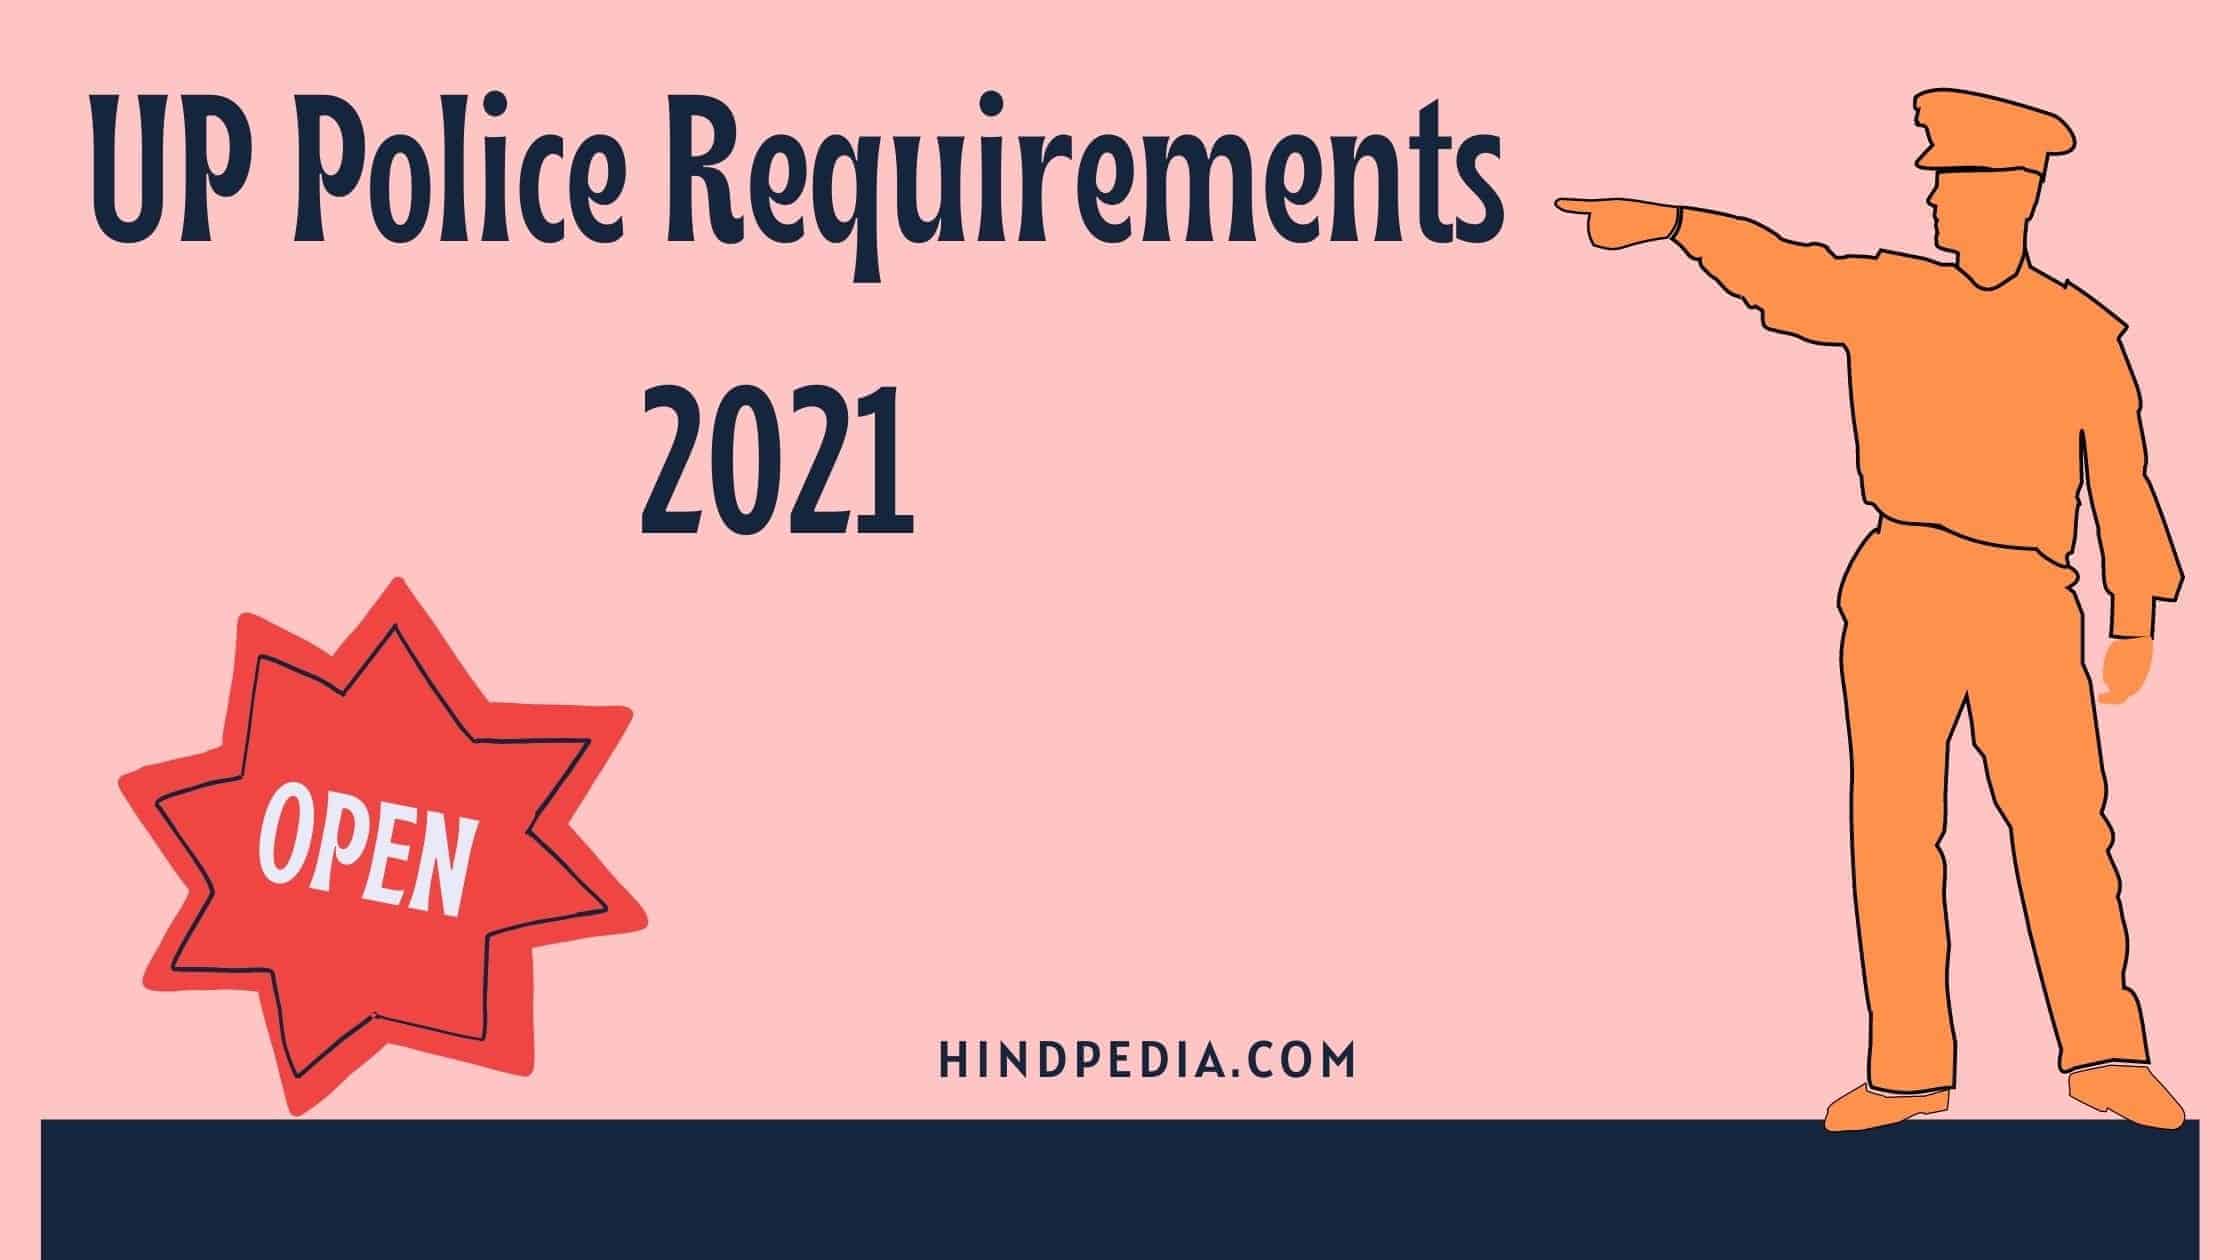 UP Police Requirements 2021 |UP Police एग्जाम के लिए Apply कैसे करे?